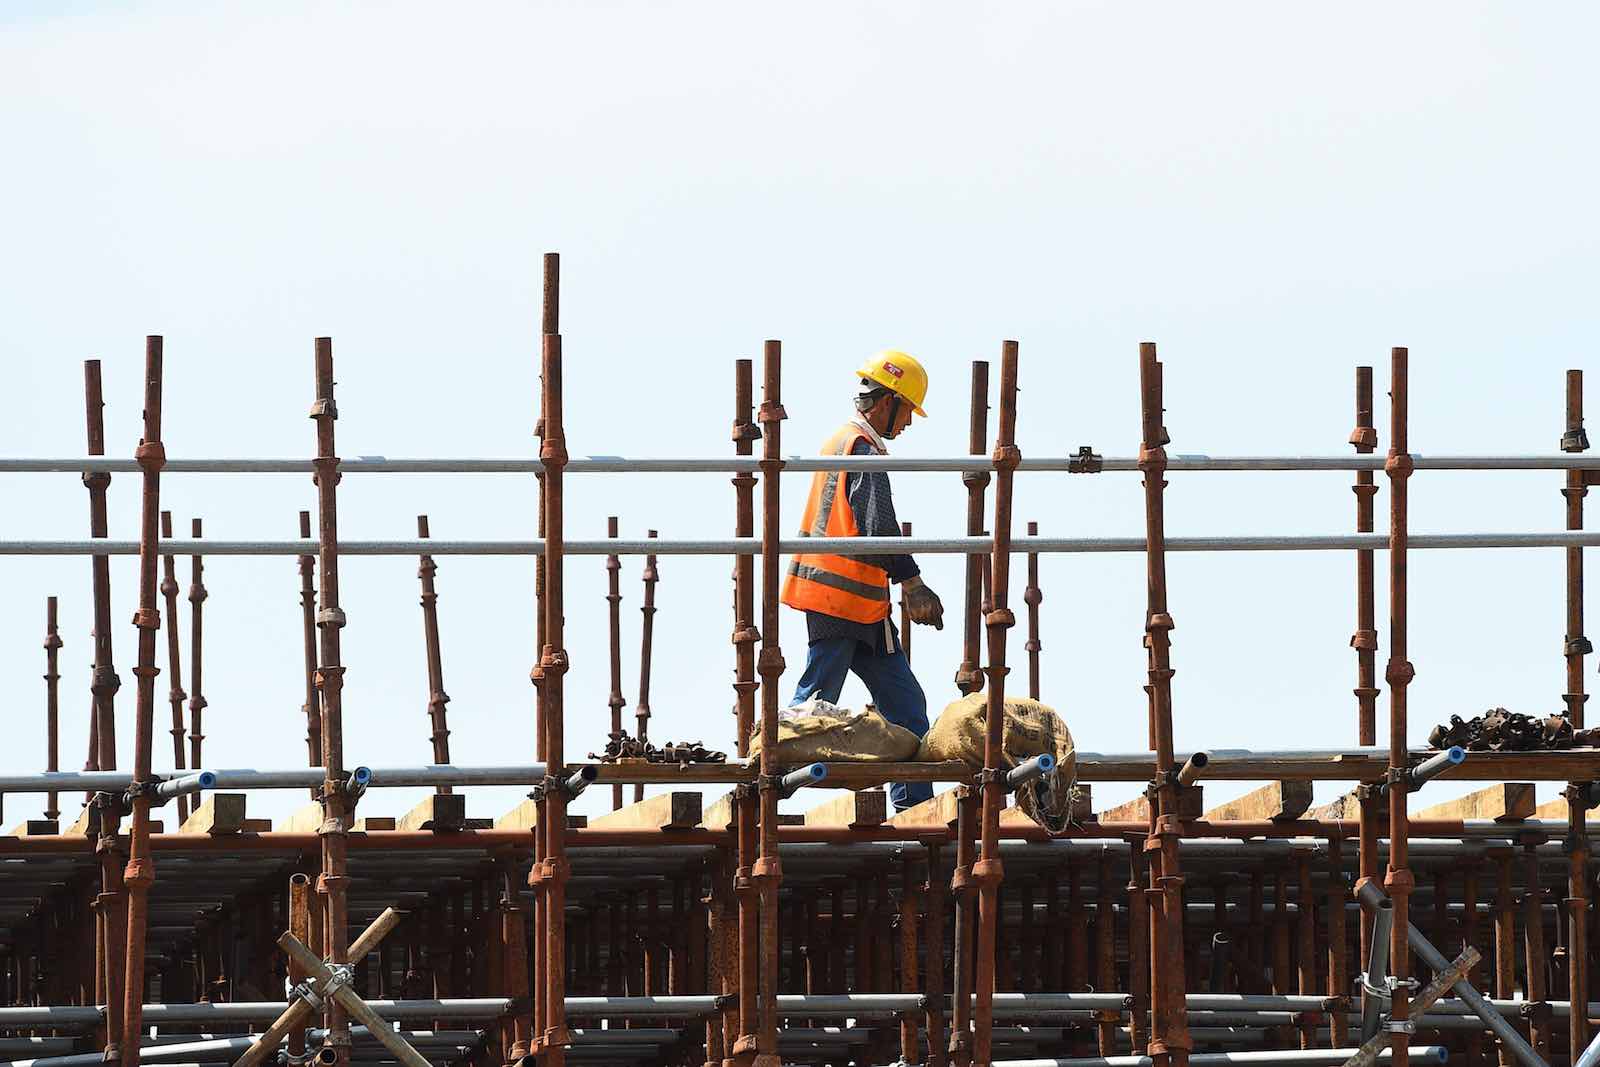 The construction site on reclaimed land, part of a Chinese-funded project for Port City, in Colombo, Sri Lanka (Ishara S. Kodikara/AFP/Getty Images)